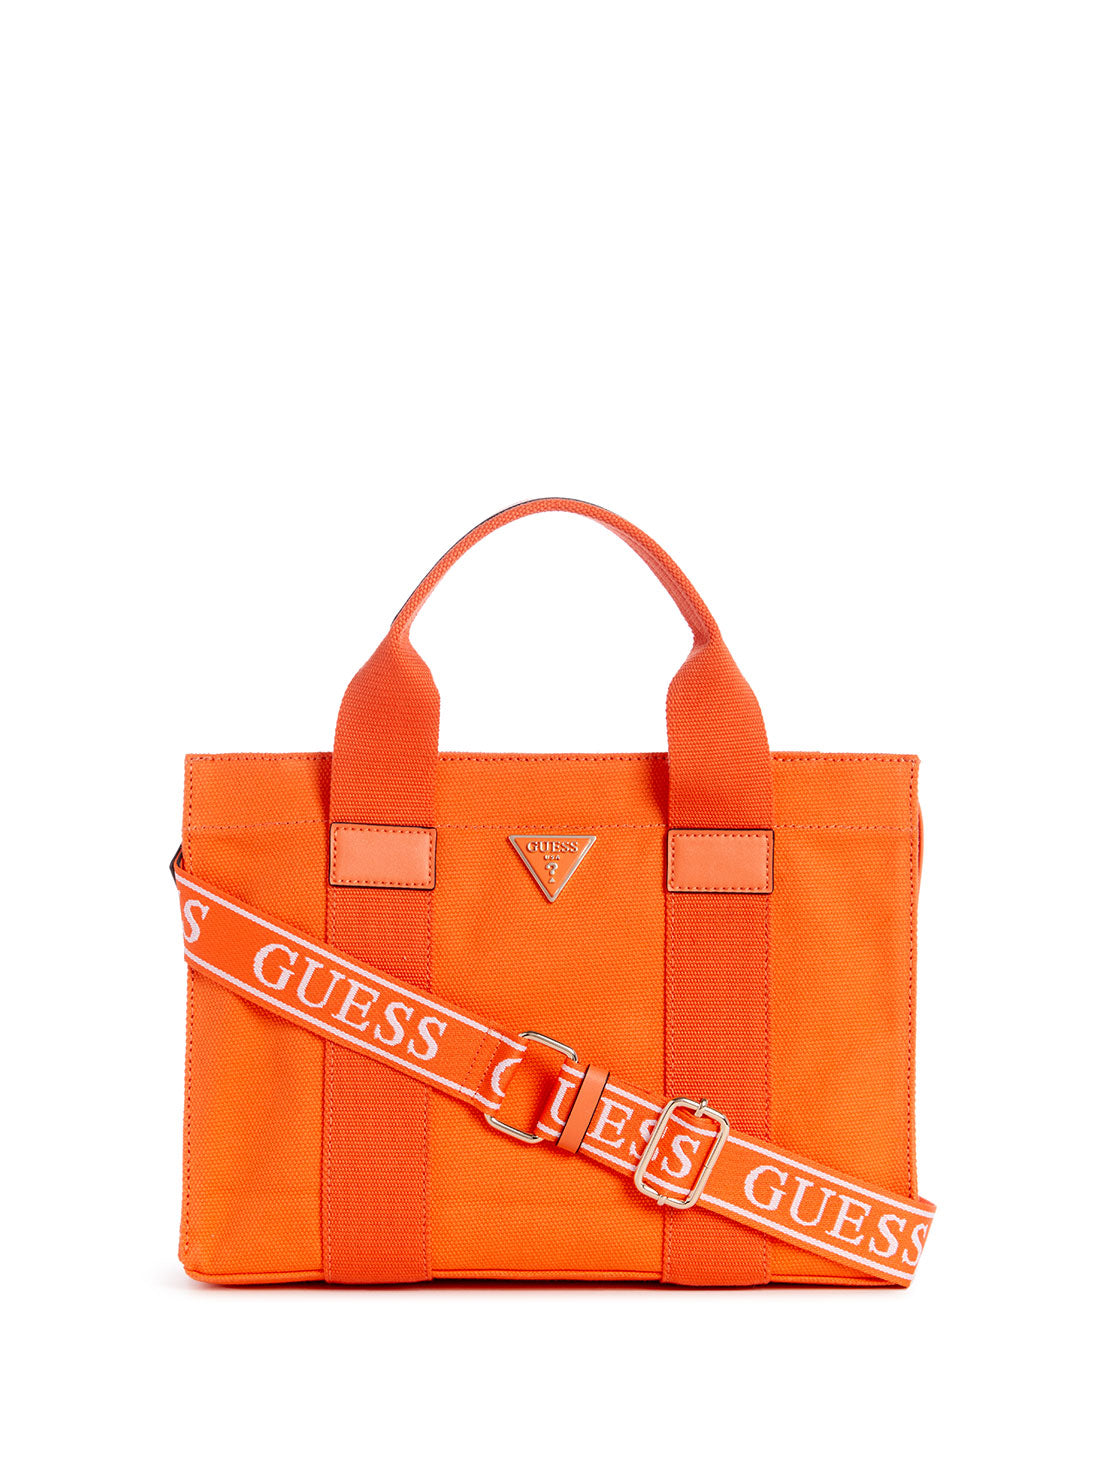 GUESS Orange Canvas Small Tote Bag front view